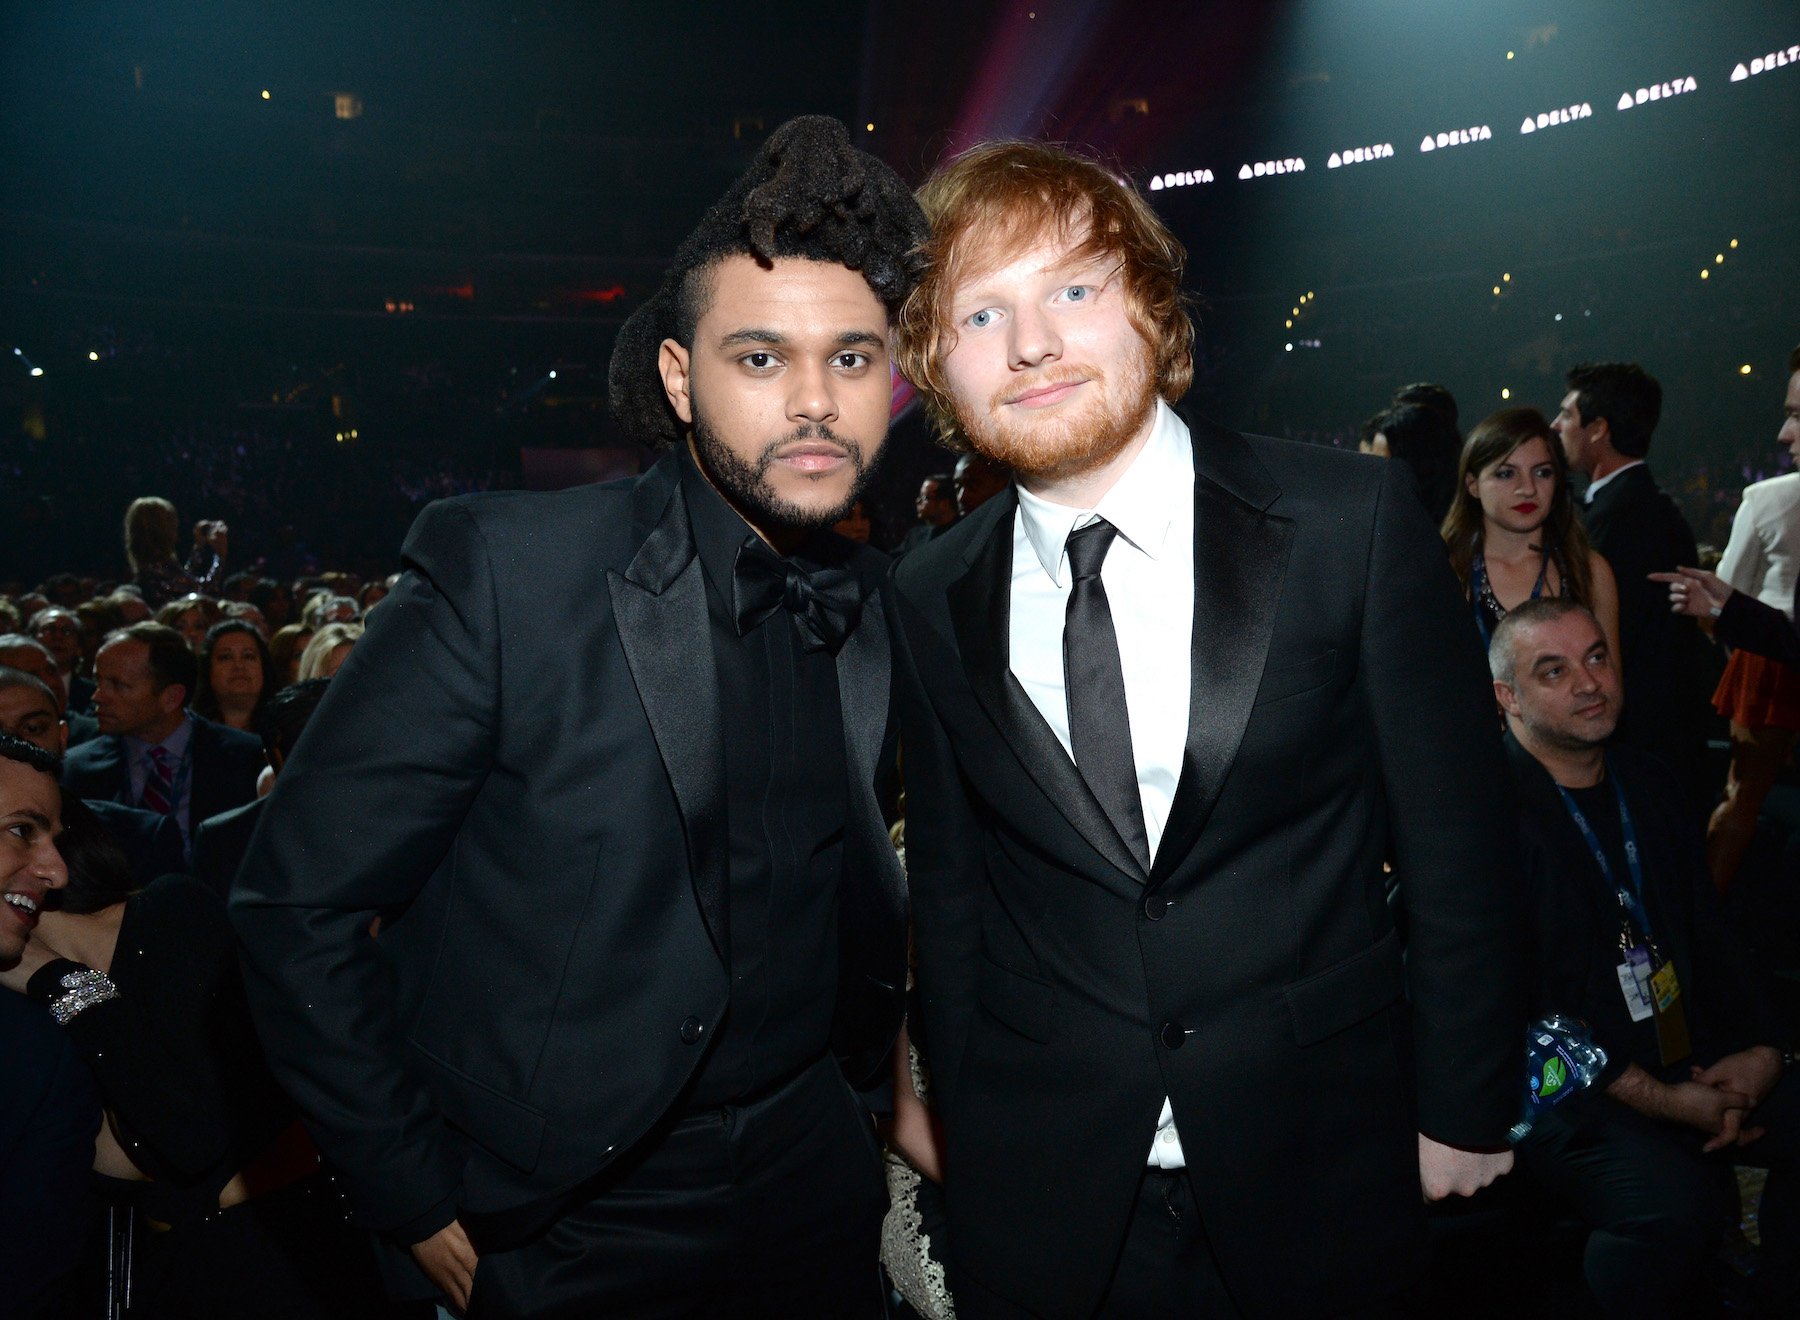 The Weeknd Dethroned Ed Sheeran For the Most-Streamed Song on Spotify